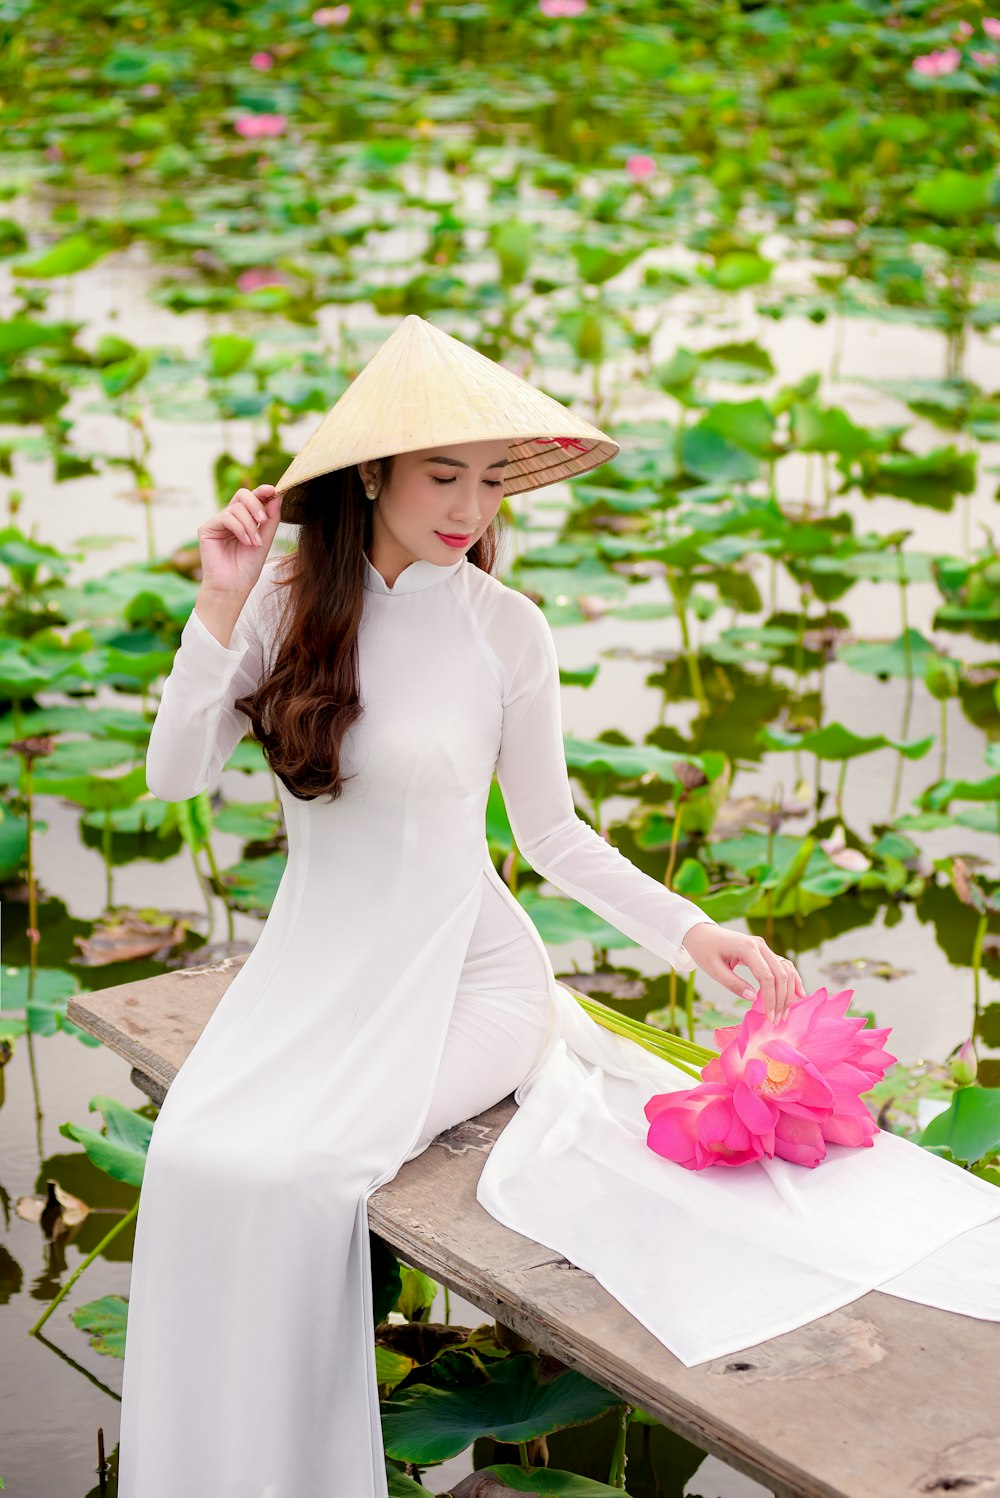 woman in white long sleeve dress wearing brown sun hat standing in front of green plants